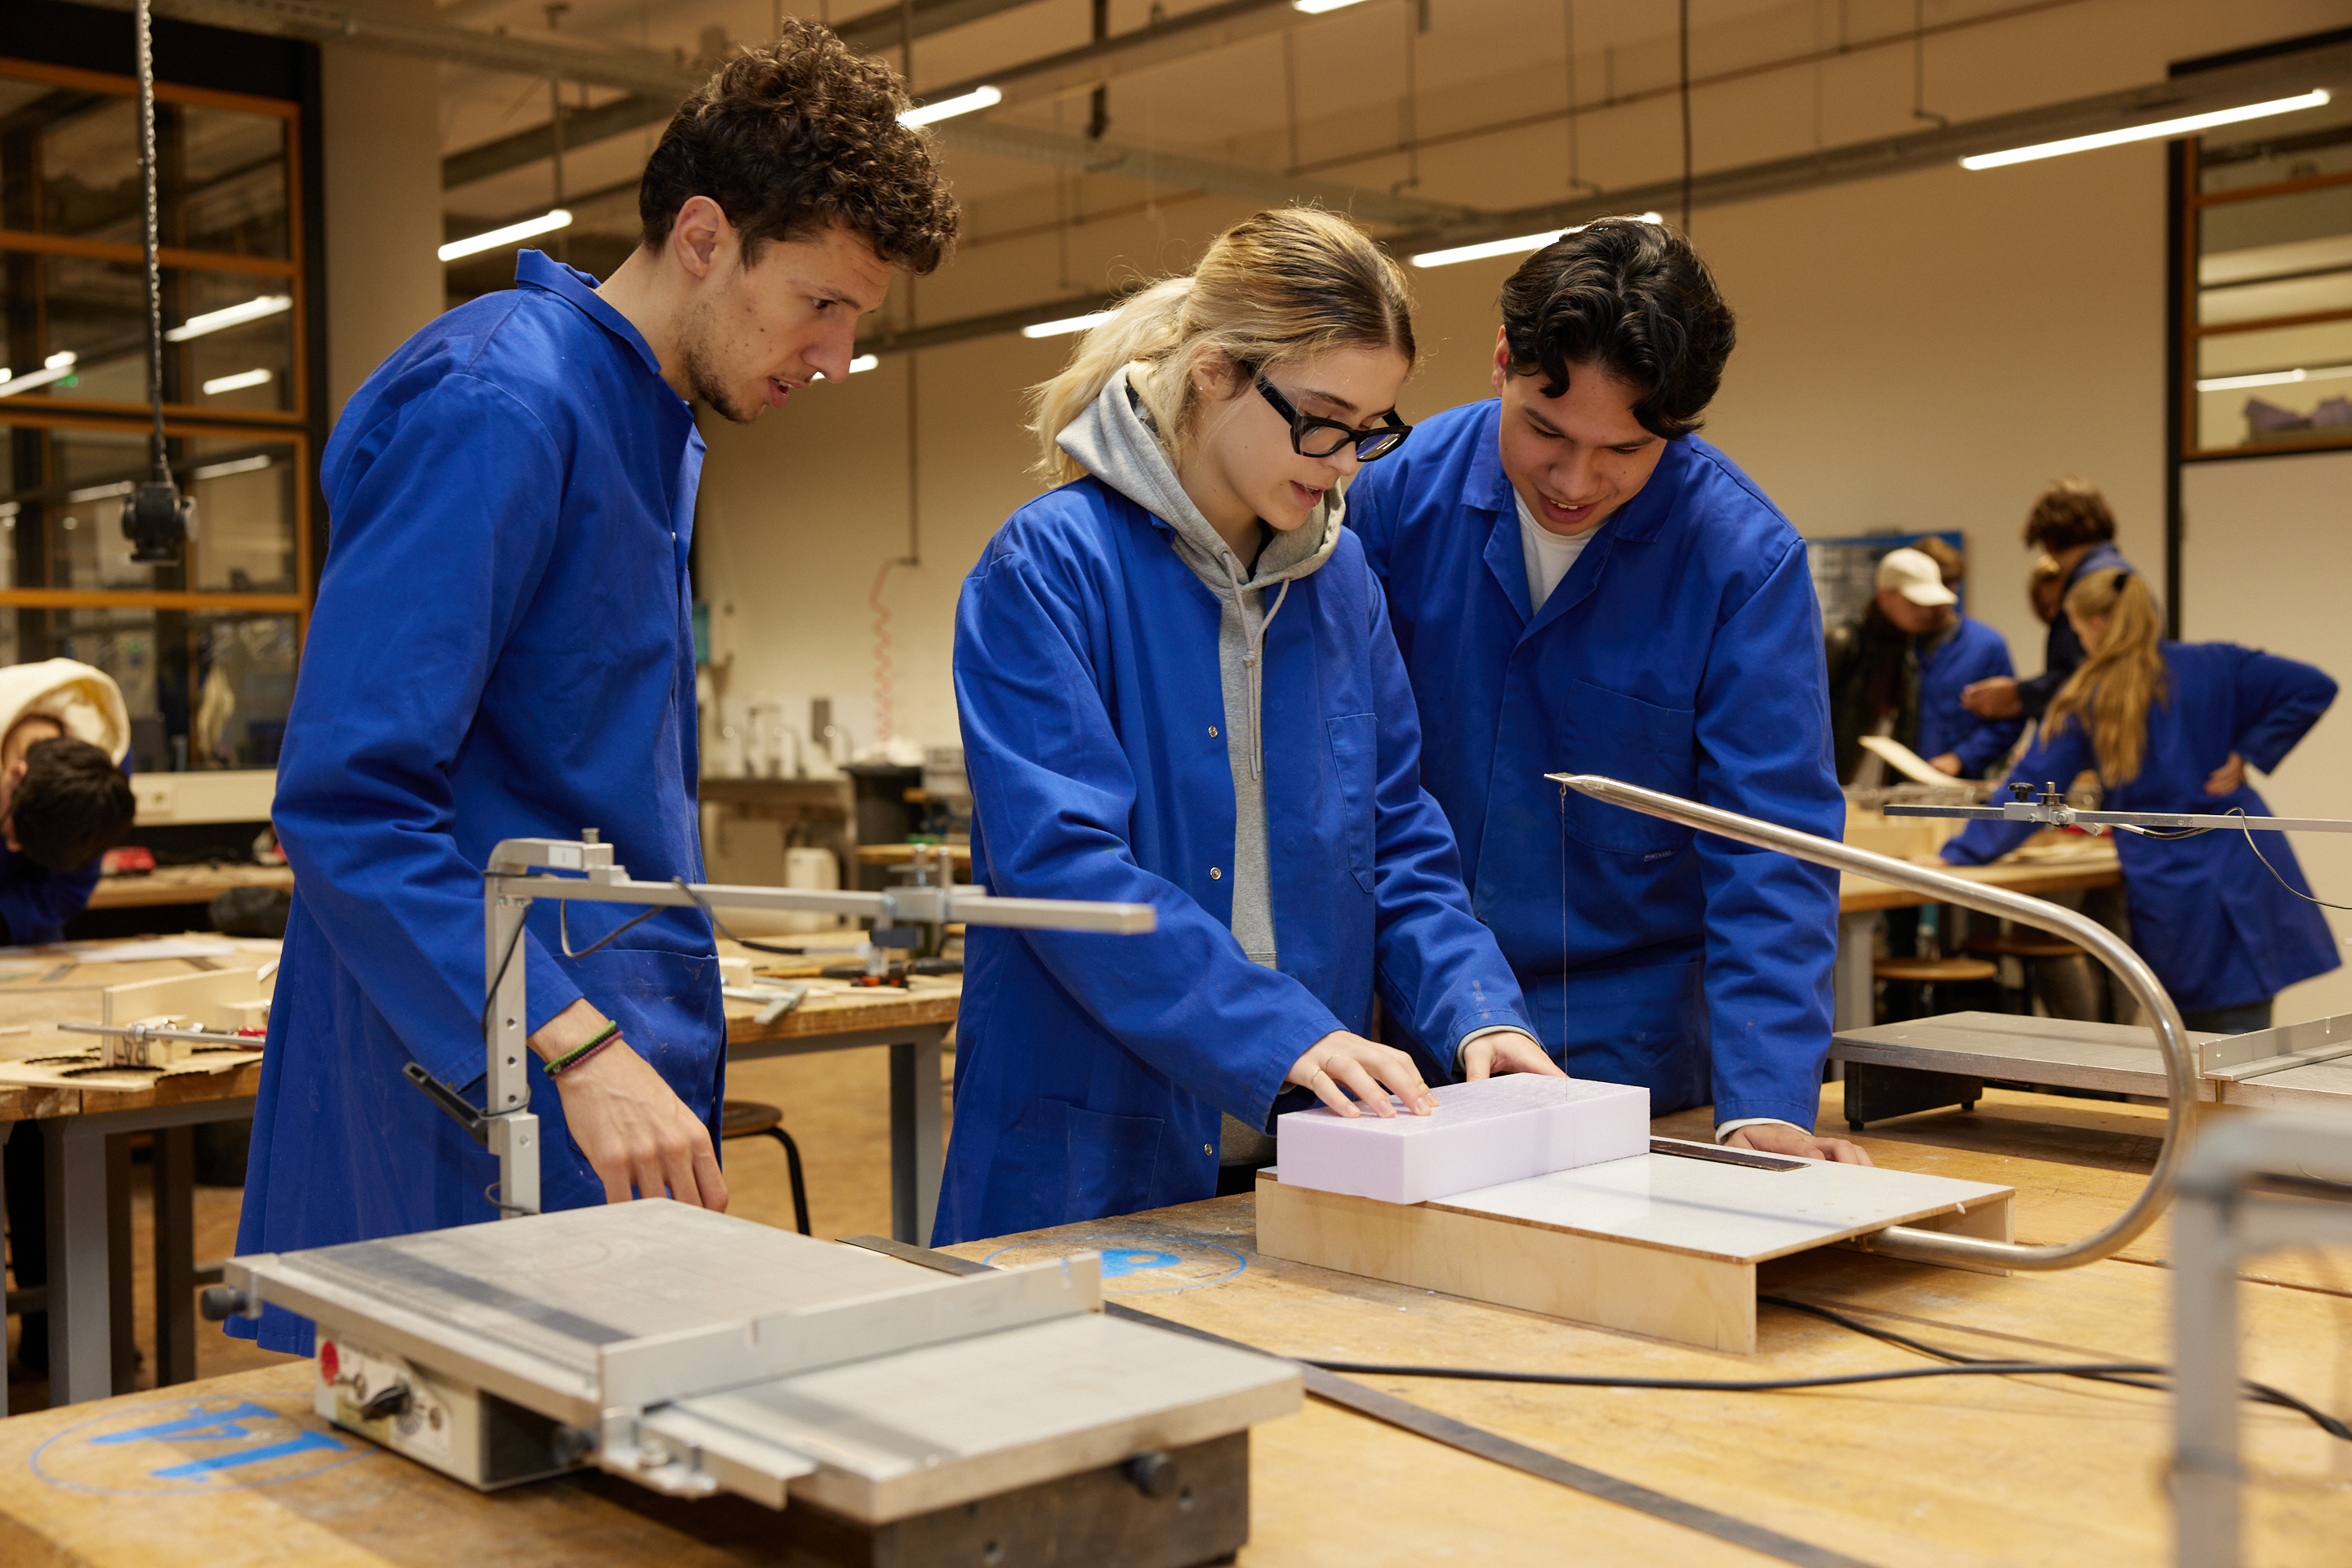 Students working in a workshop